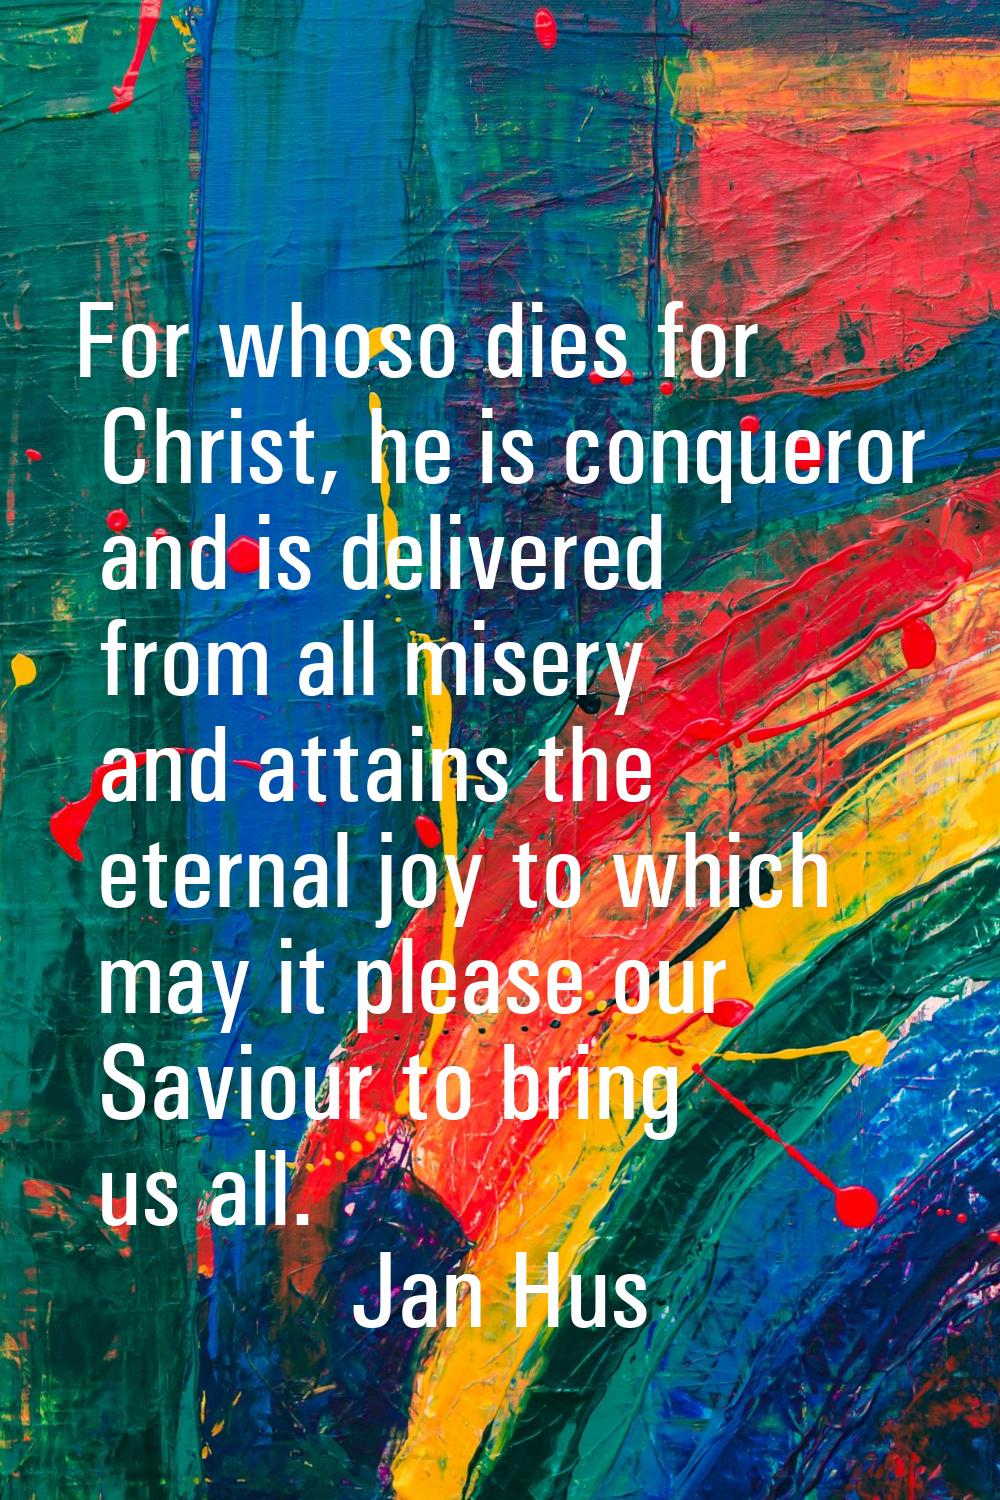 For whoso dies for Christ, he is conqueror and is delivered from all misery and attains the eternal